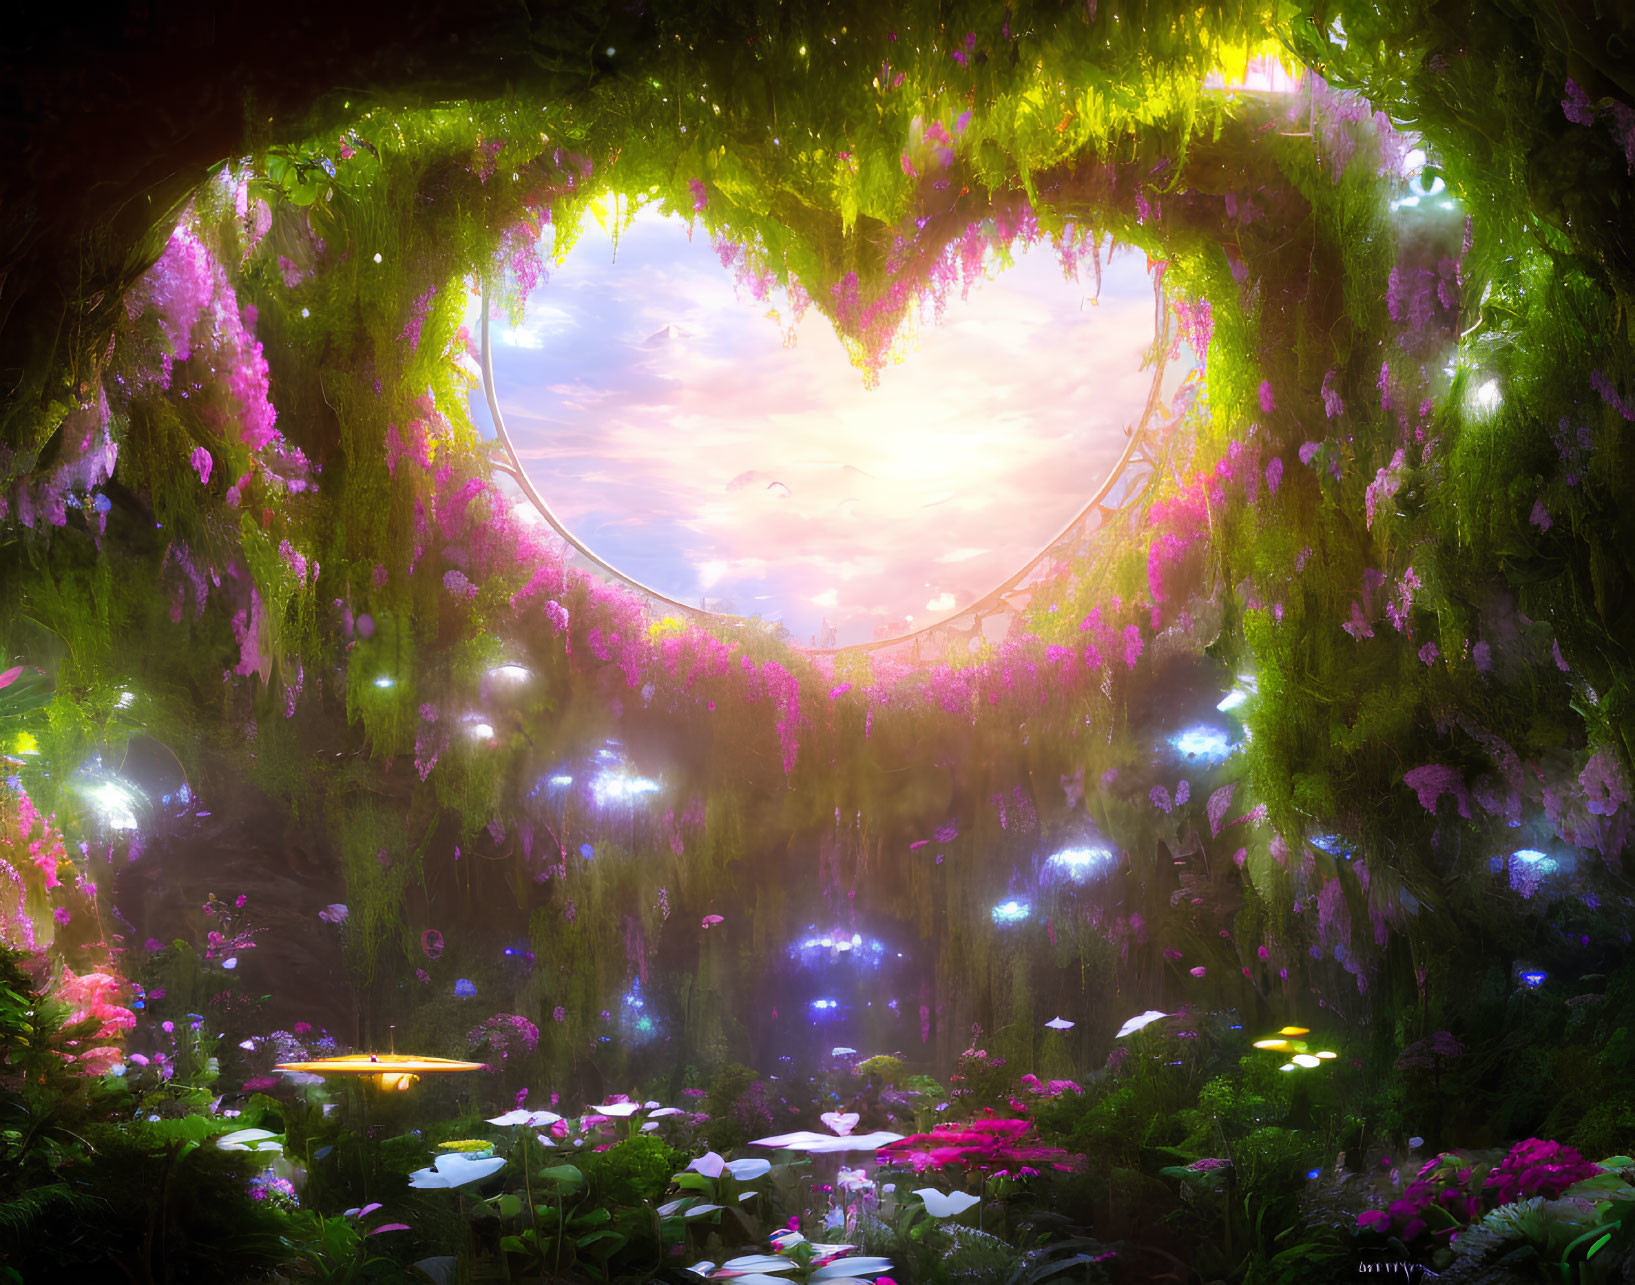 Enchanting forest glade with luminous flowers and heart-shaped opening